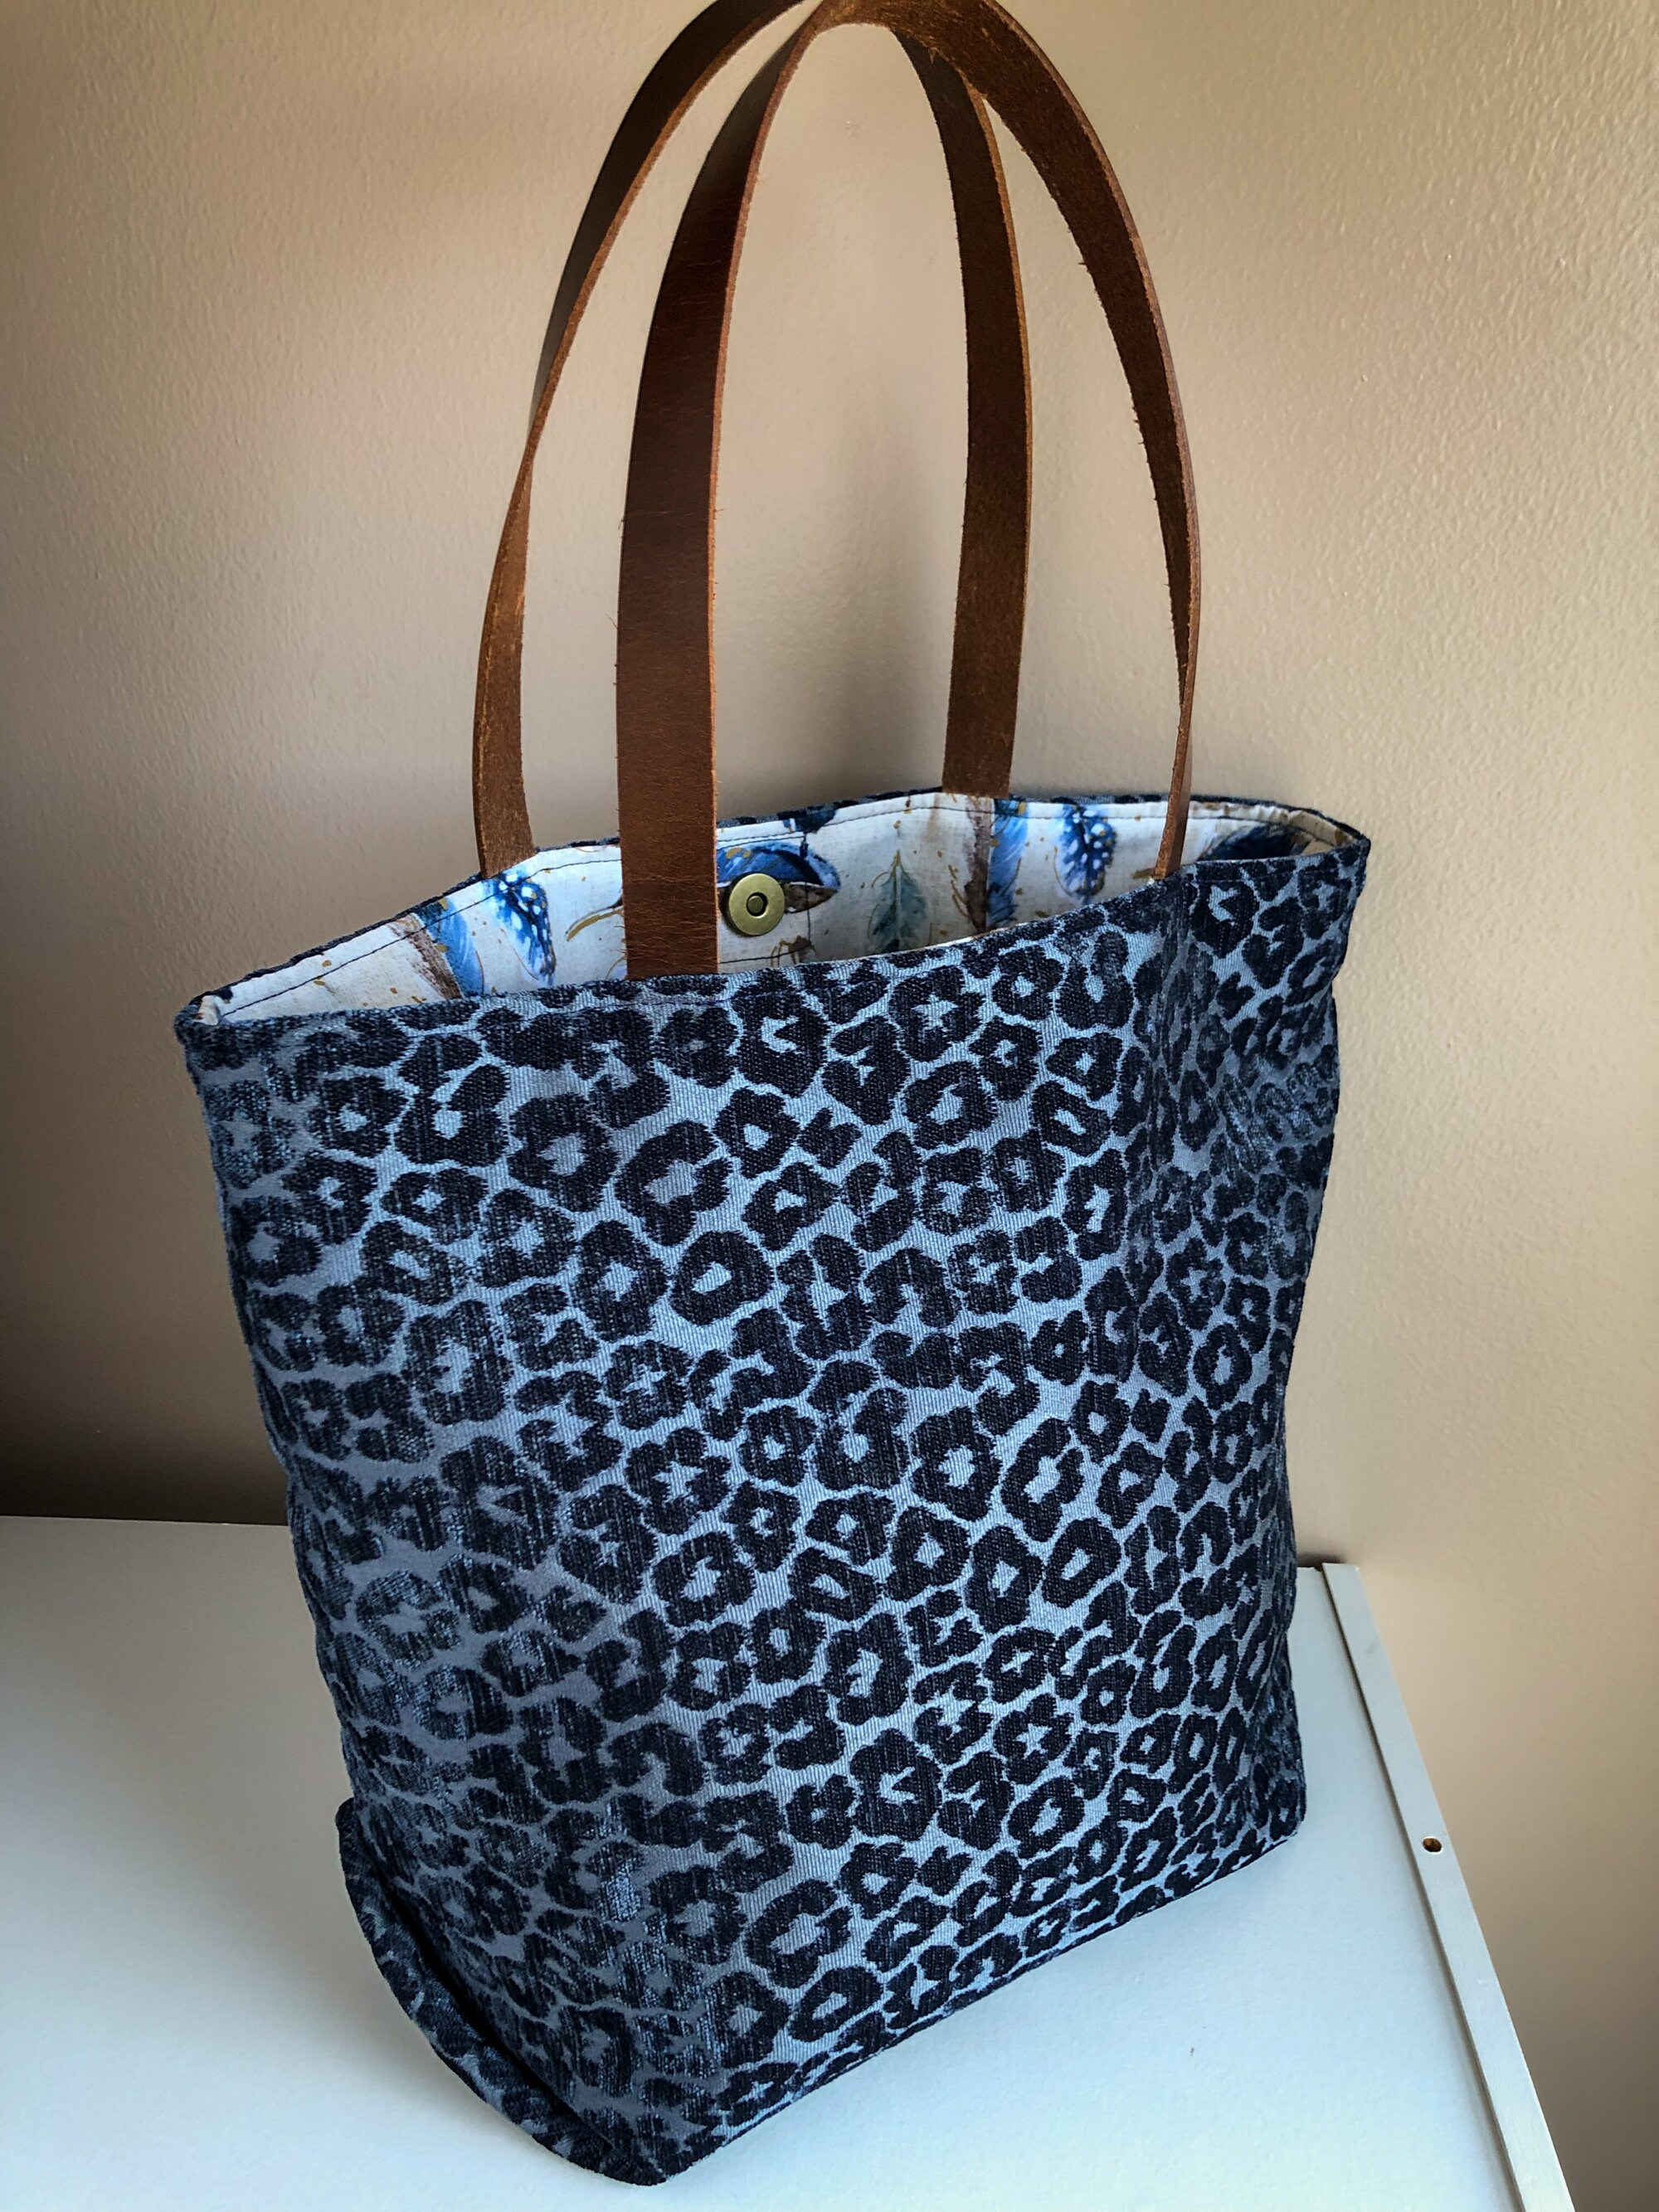 Leather Tote Bag | Canvas Tote Bags for Women - Cowgirl Wear